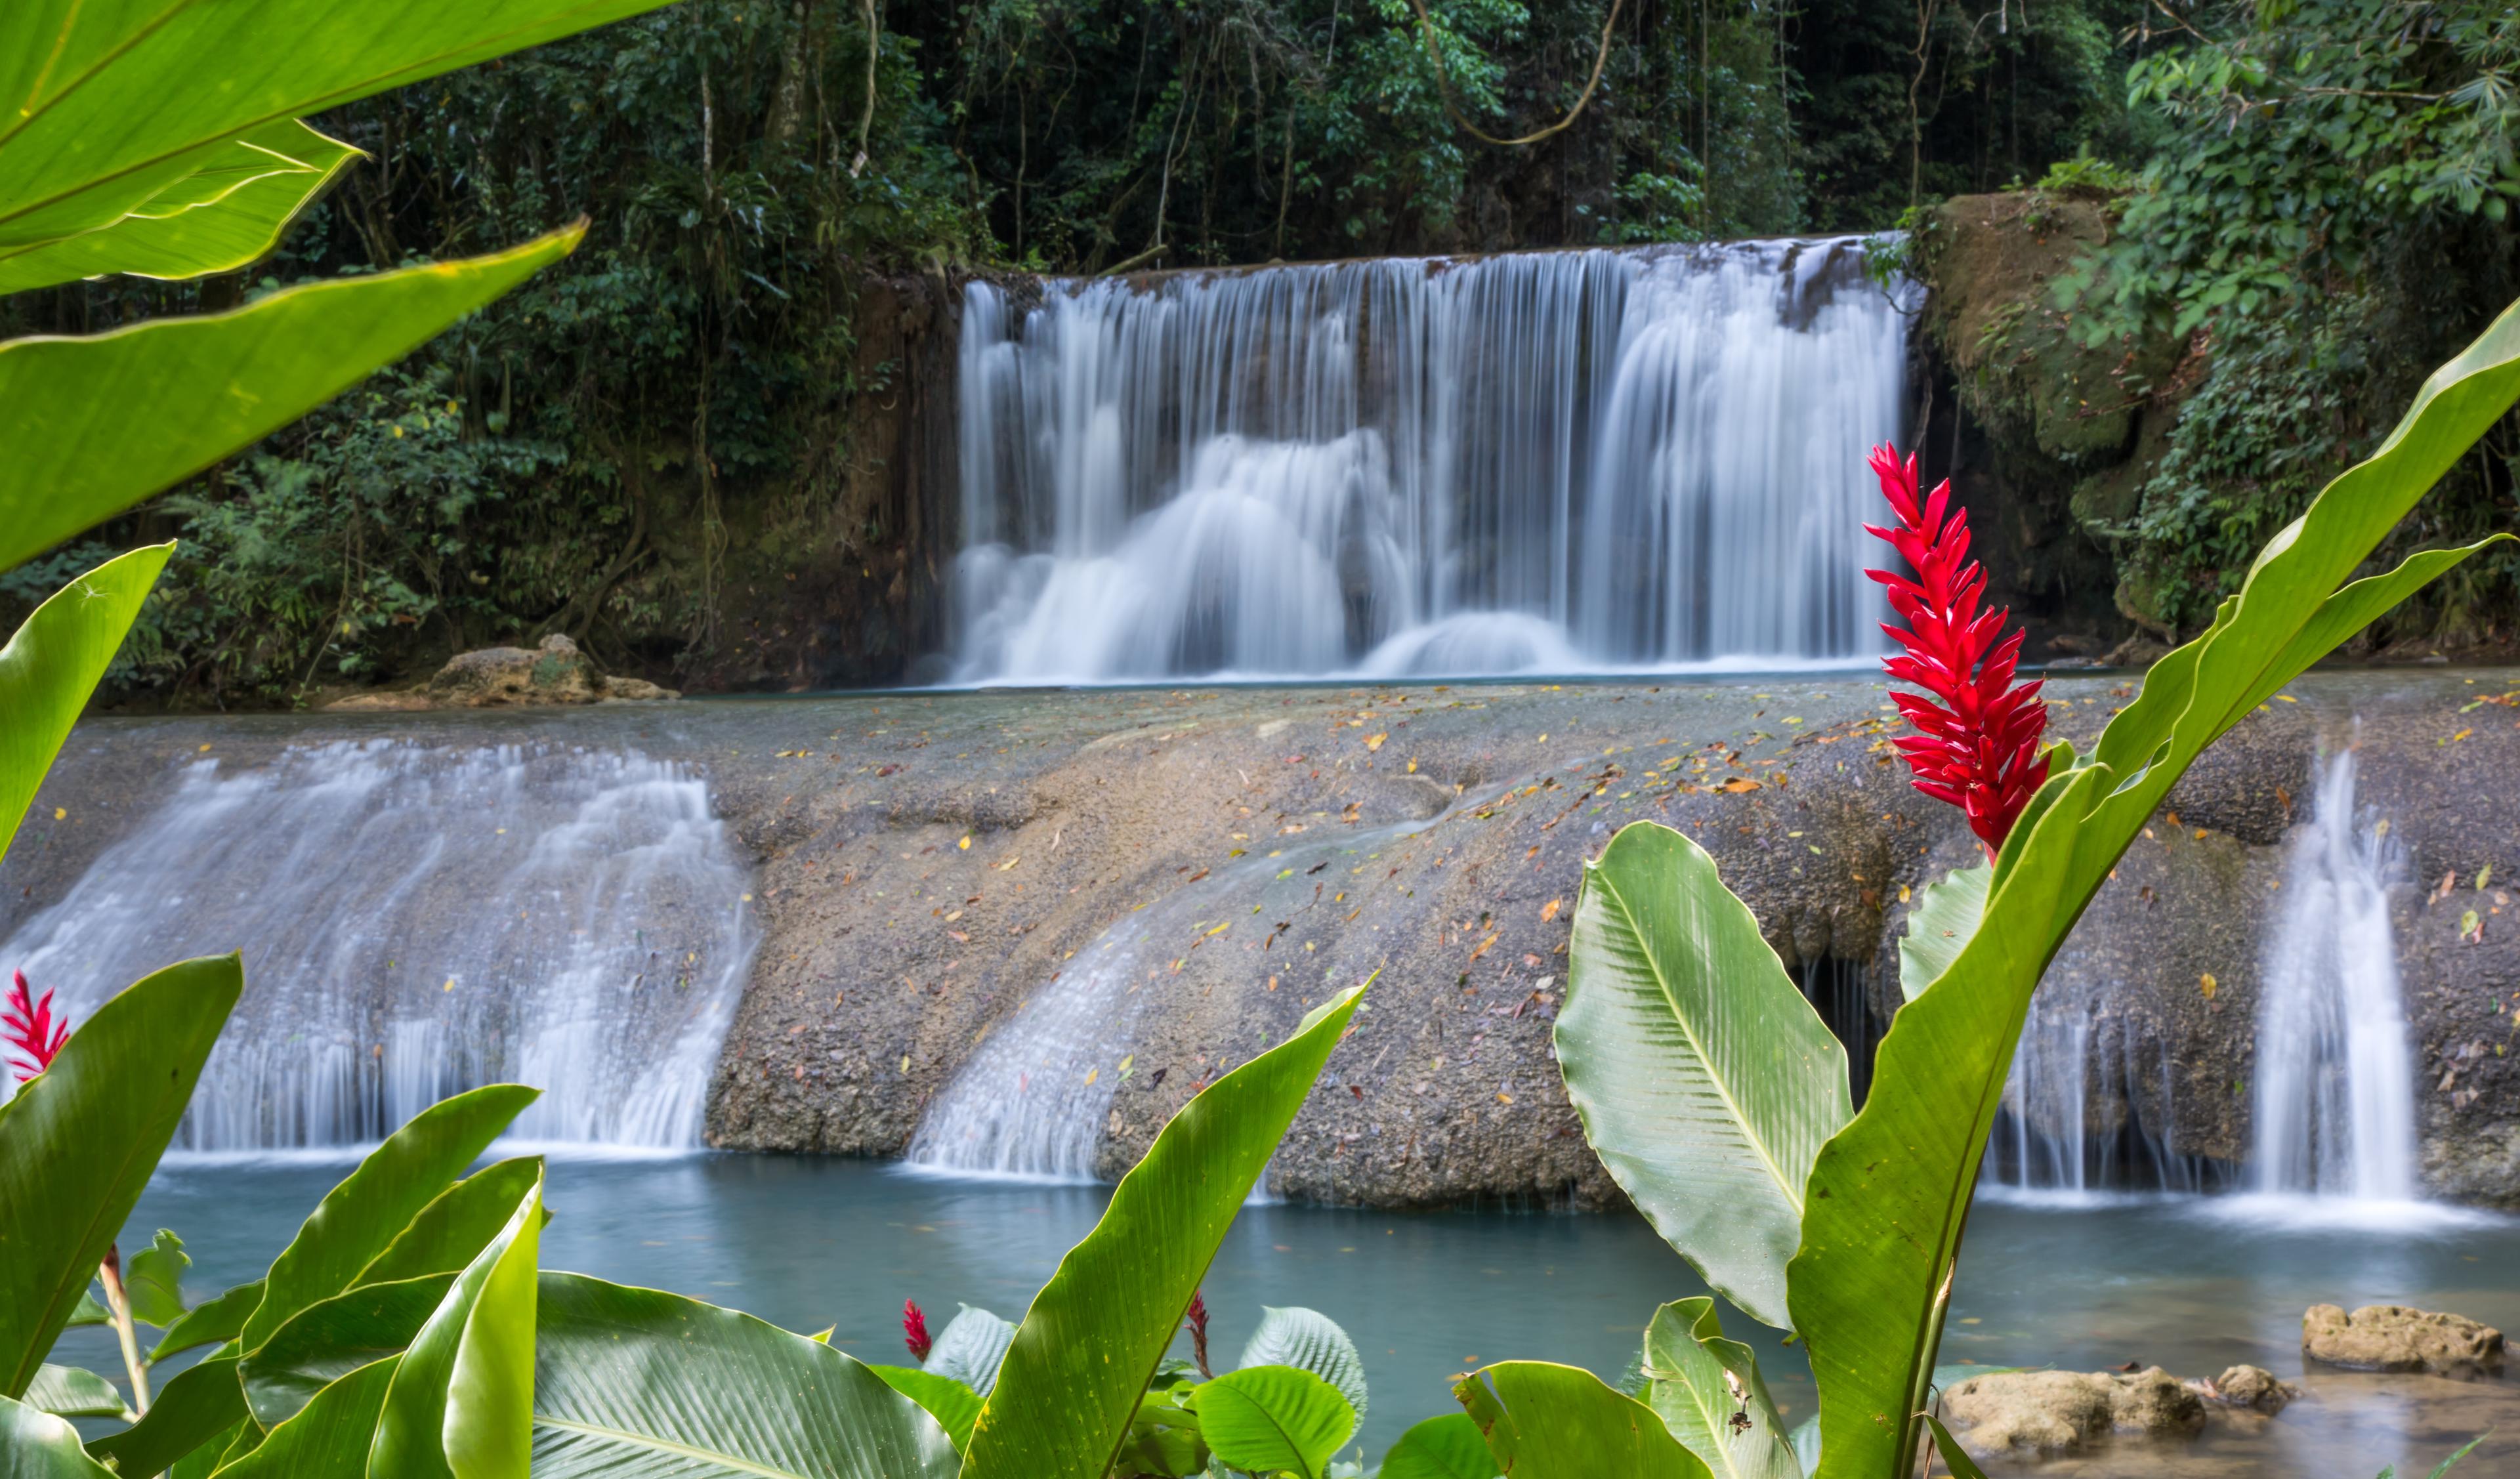 Lovely cascading waterfalls in the tropical island of Jamaica